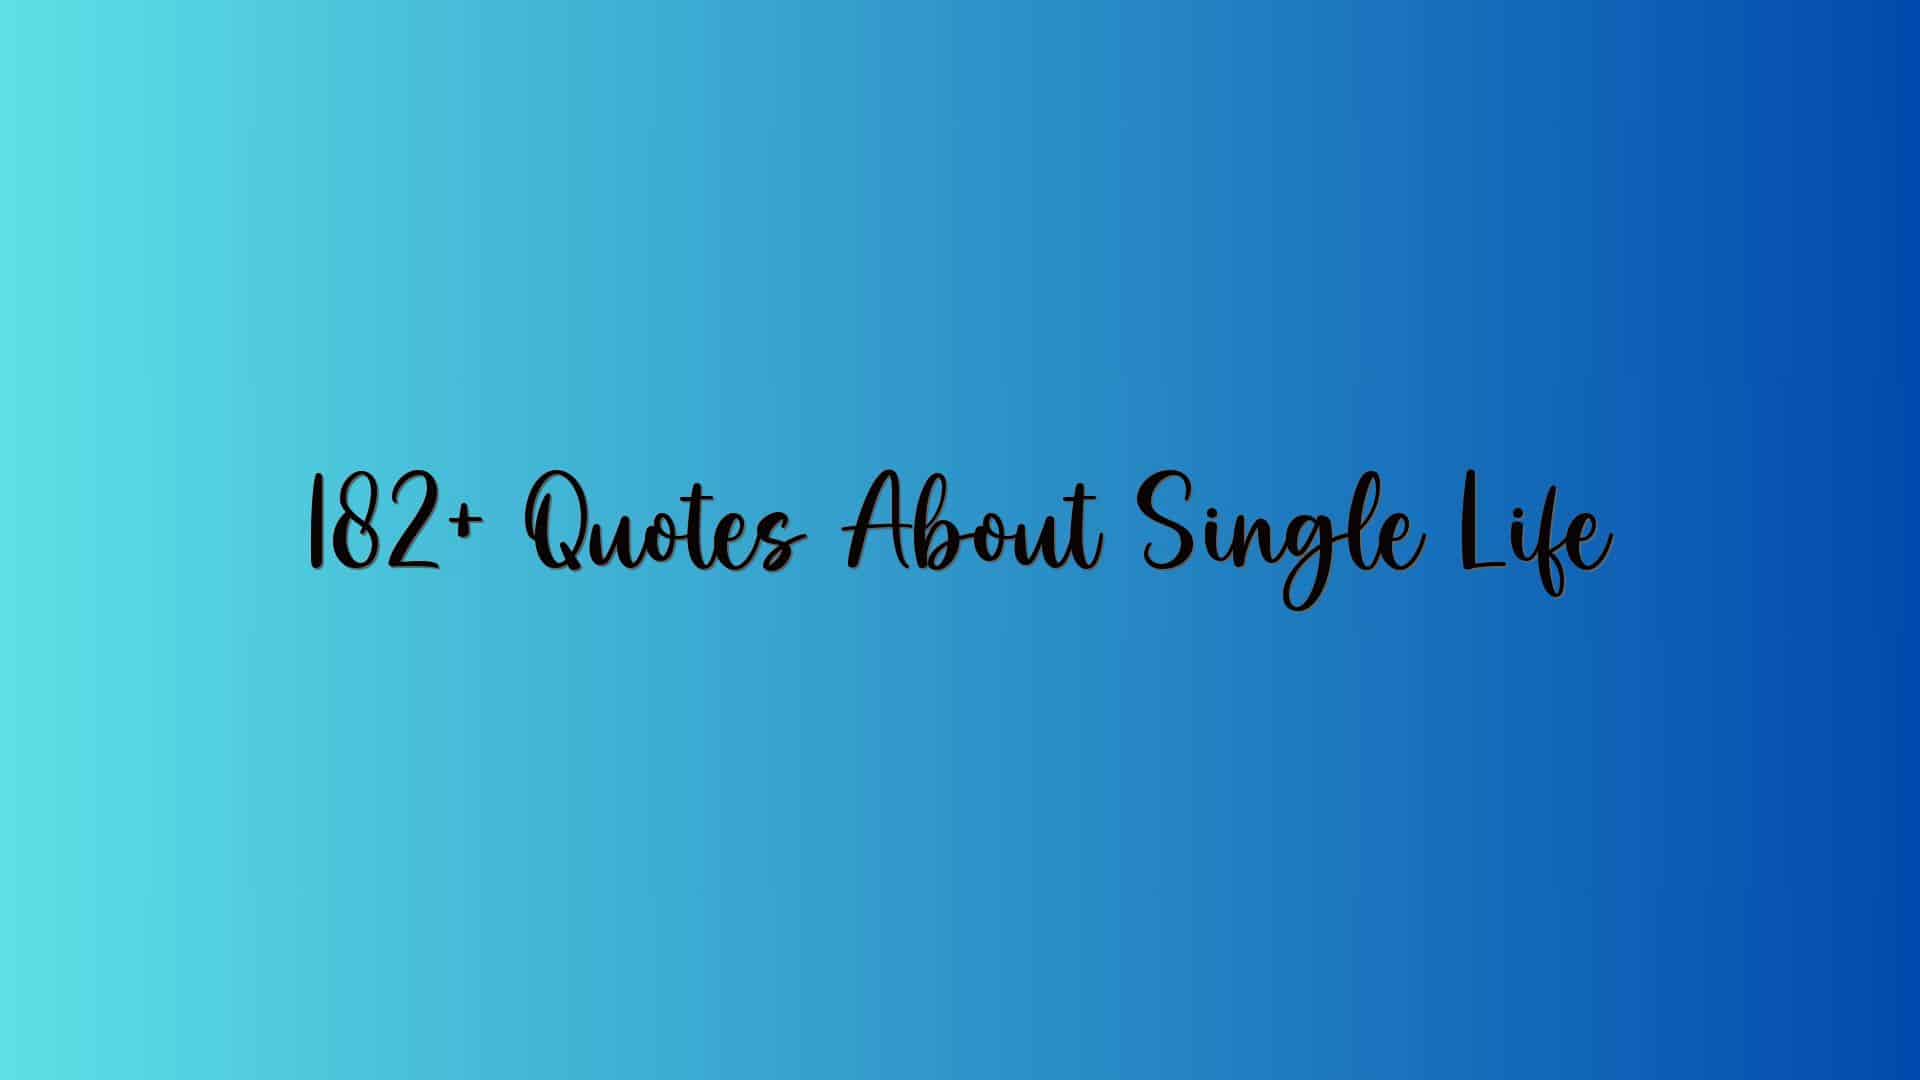 182+ Quotes About Single Life